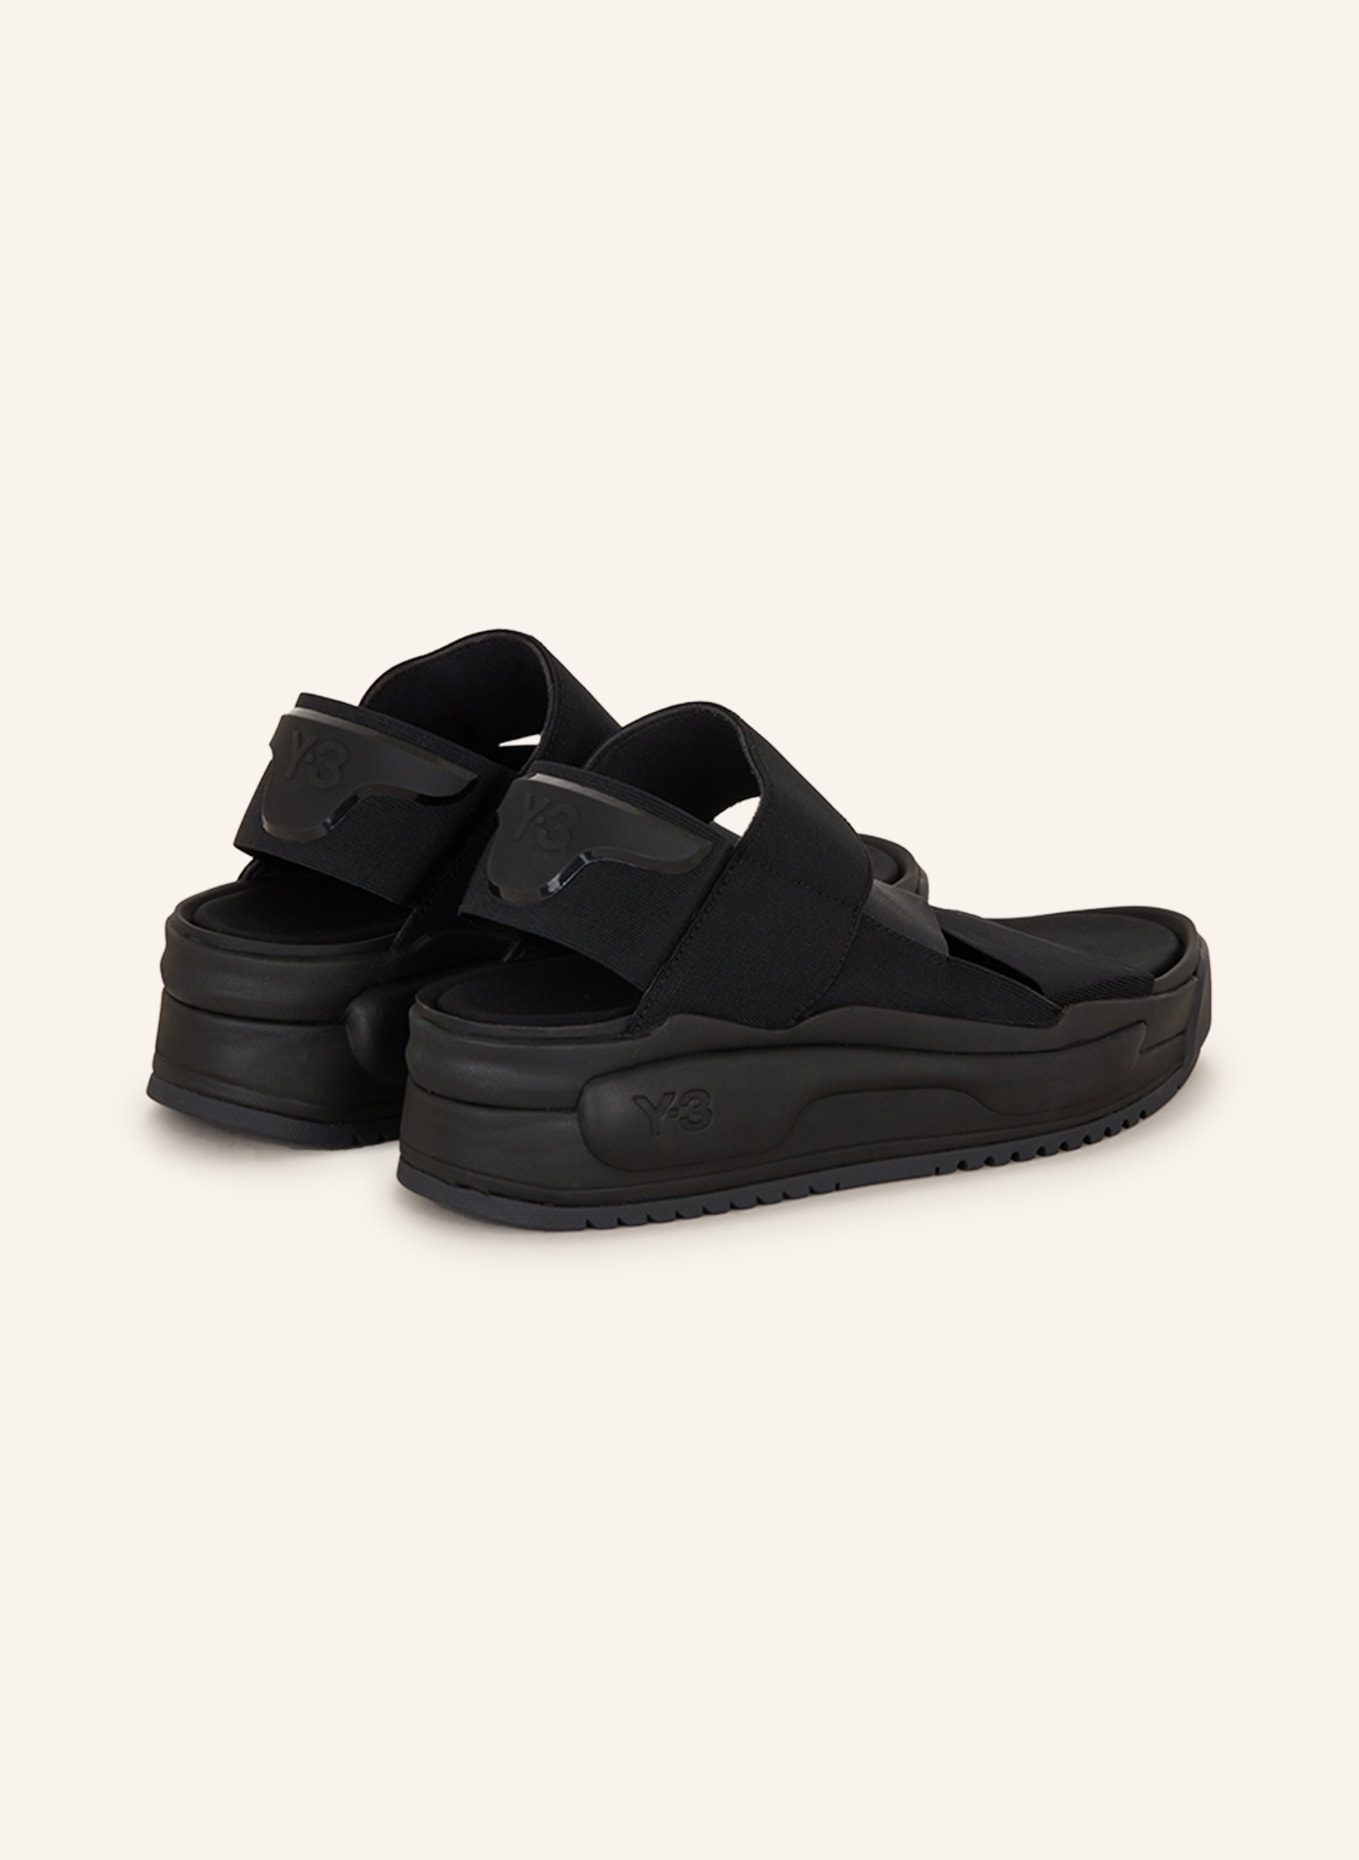 Y-3 Sandals RIVALRY in black